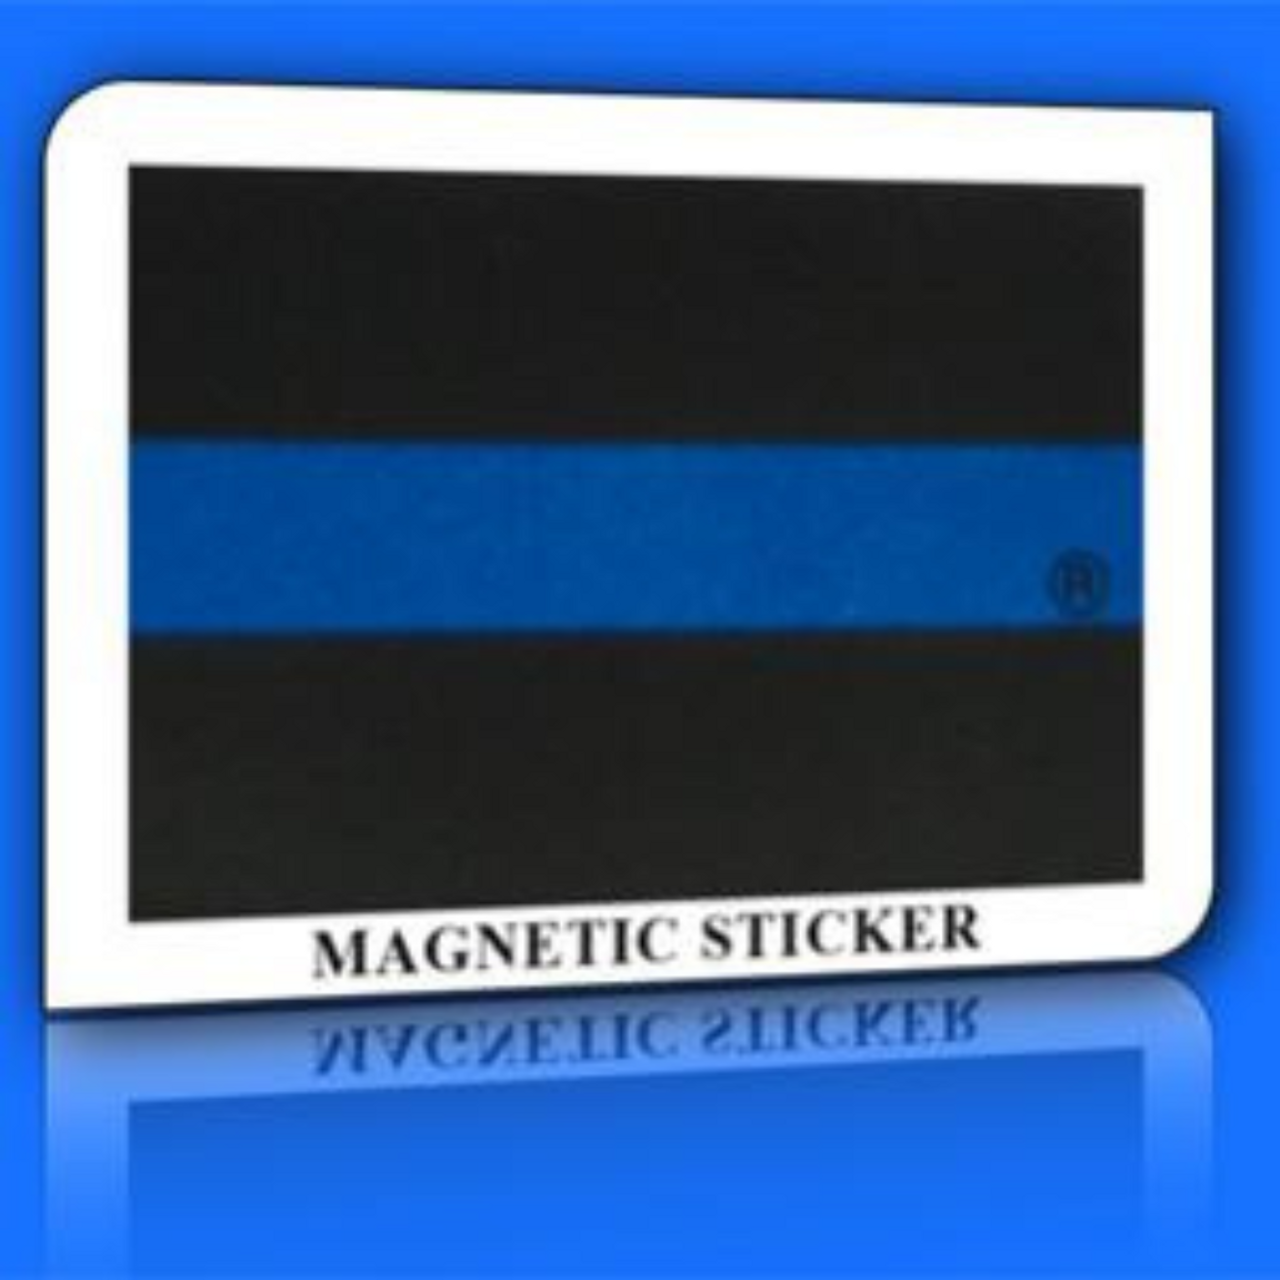 Blue Line Identifier | Plate and Stickers